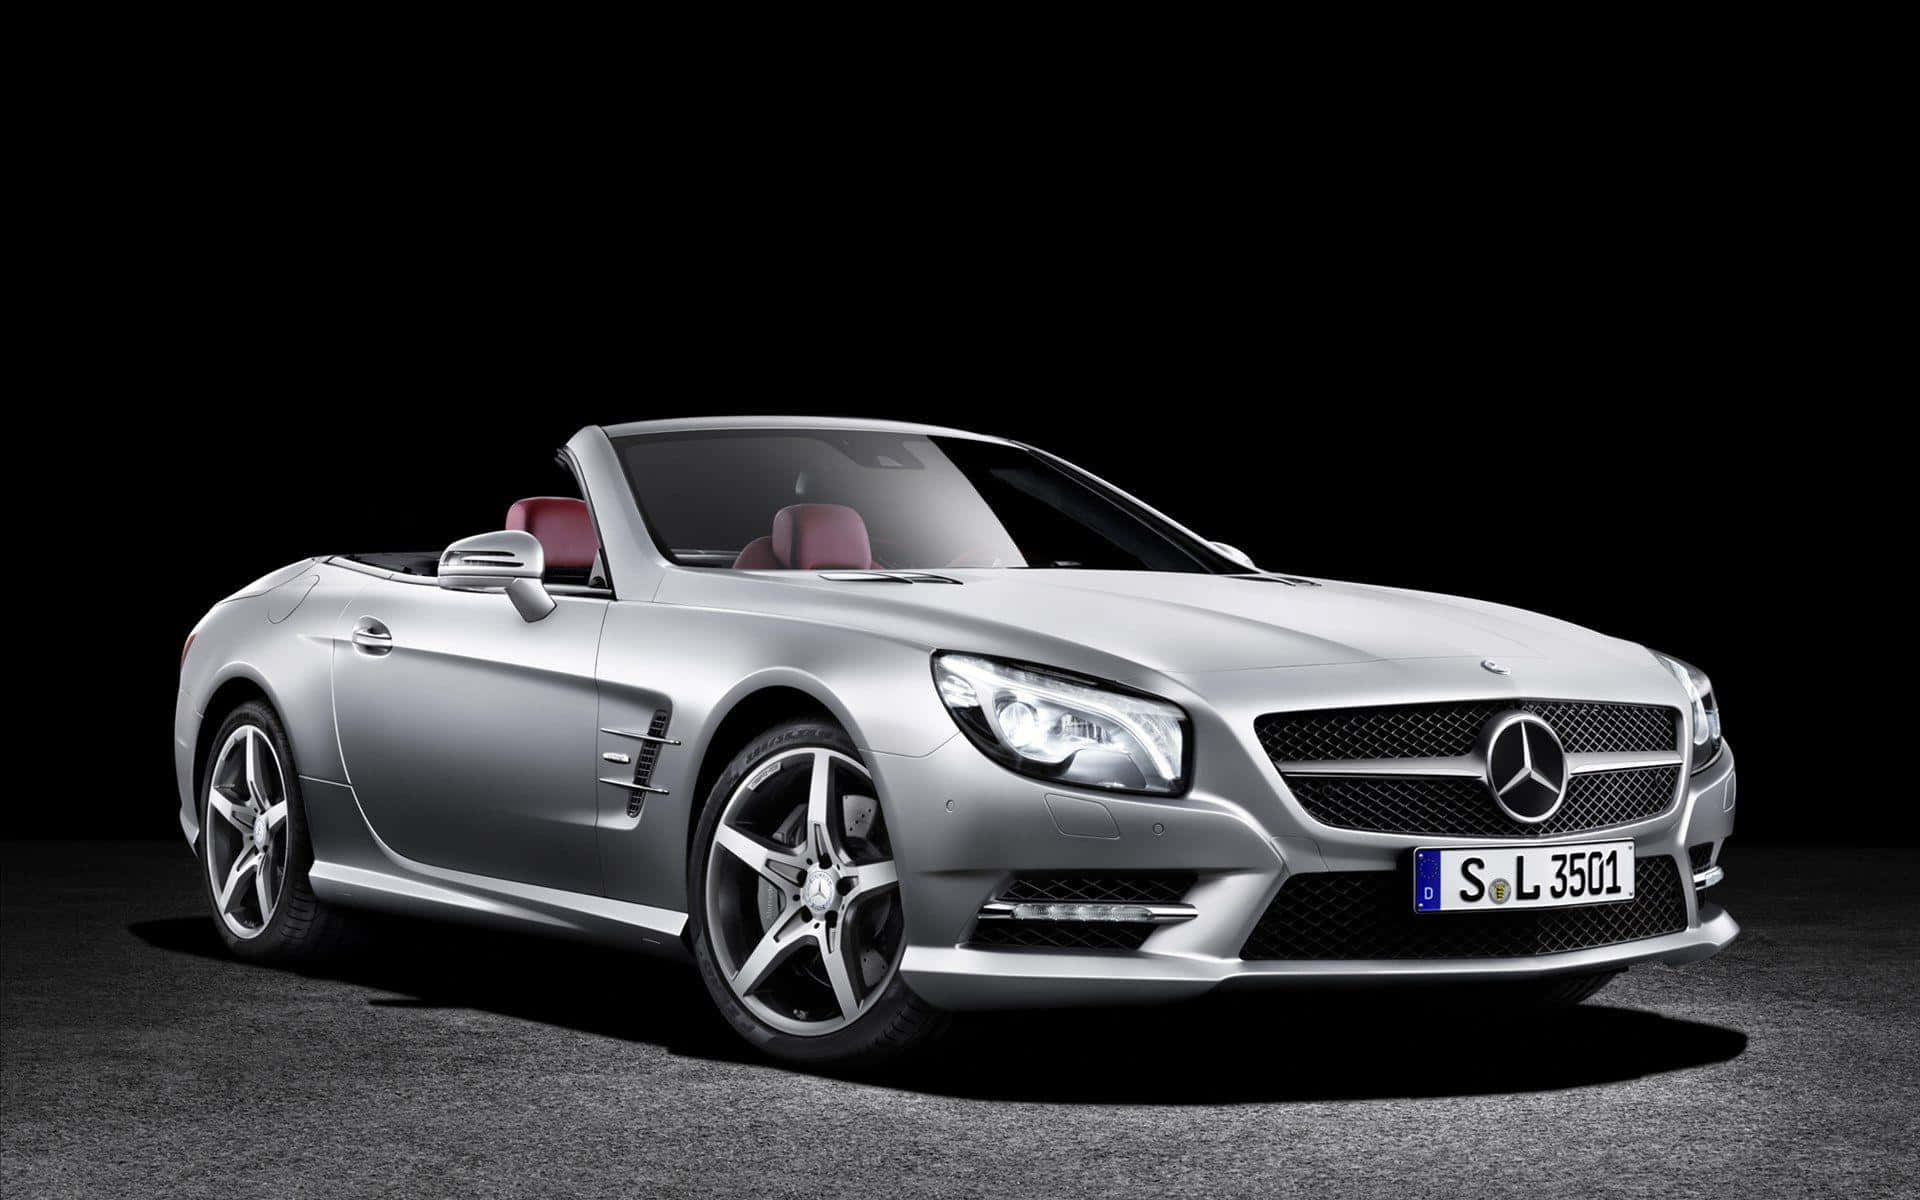 Sleek and Stylish Mercedes Benz SL-Class Convertible on the Road Wallpaper